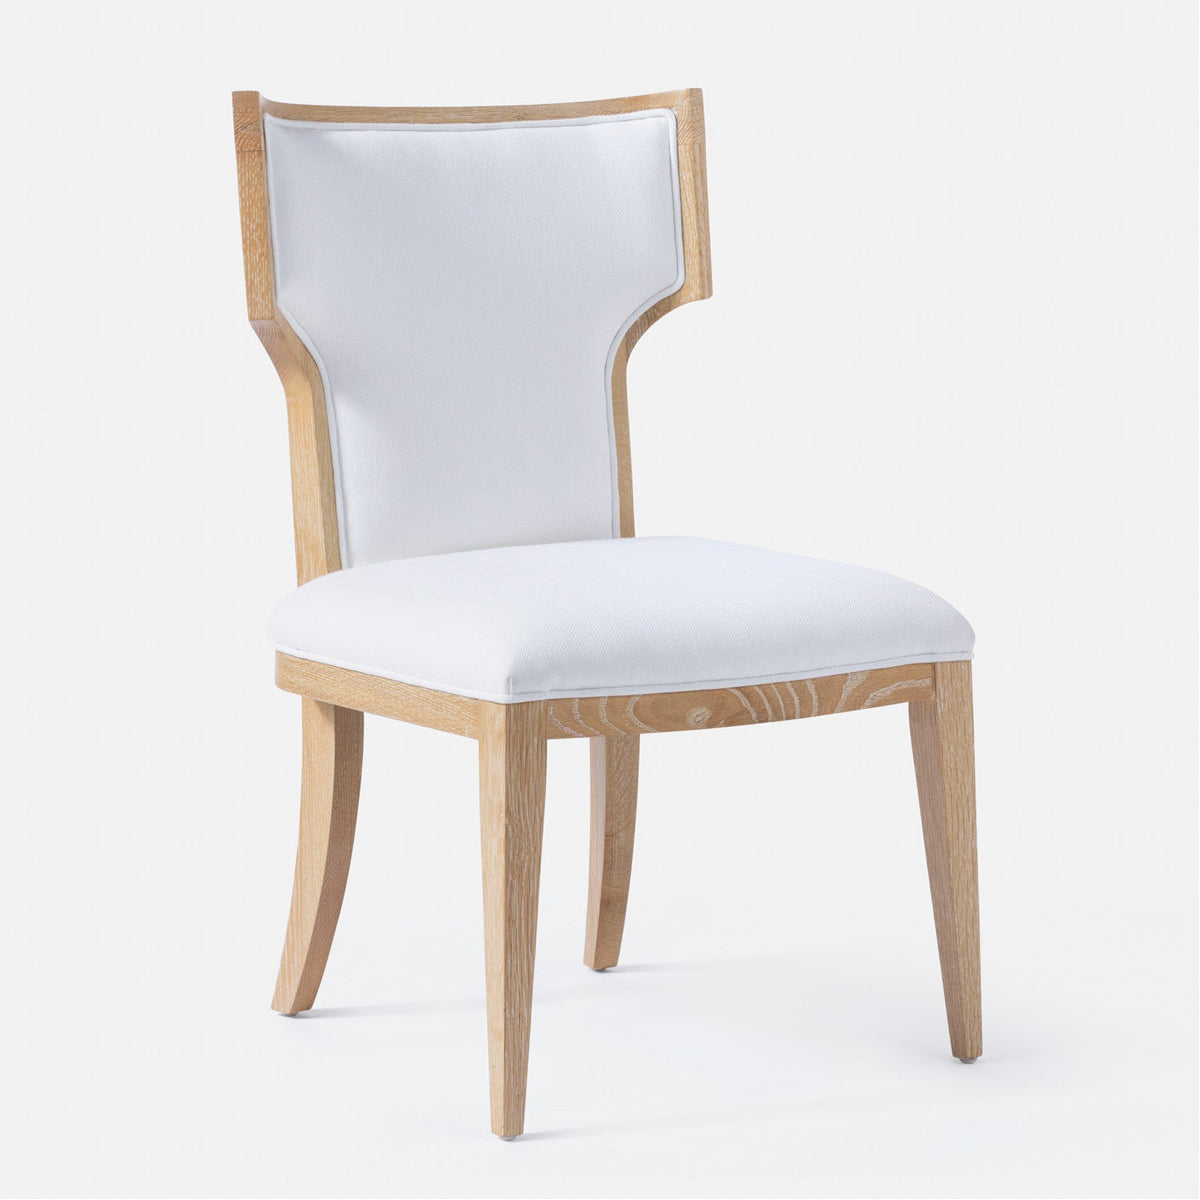 Made Goods Carleen Wingback Dining Chair in Pagua Fabric